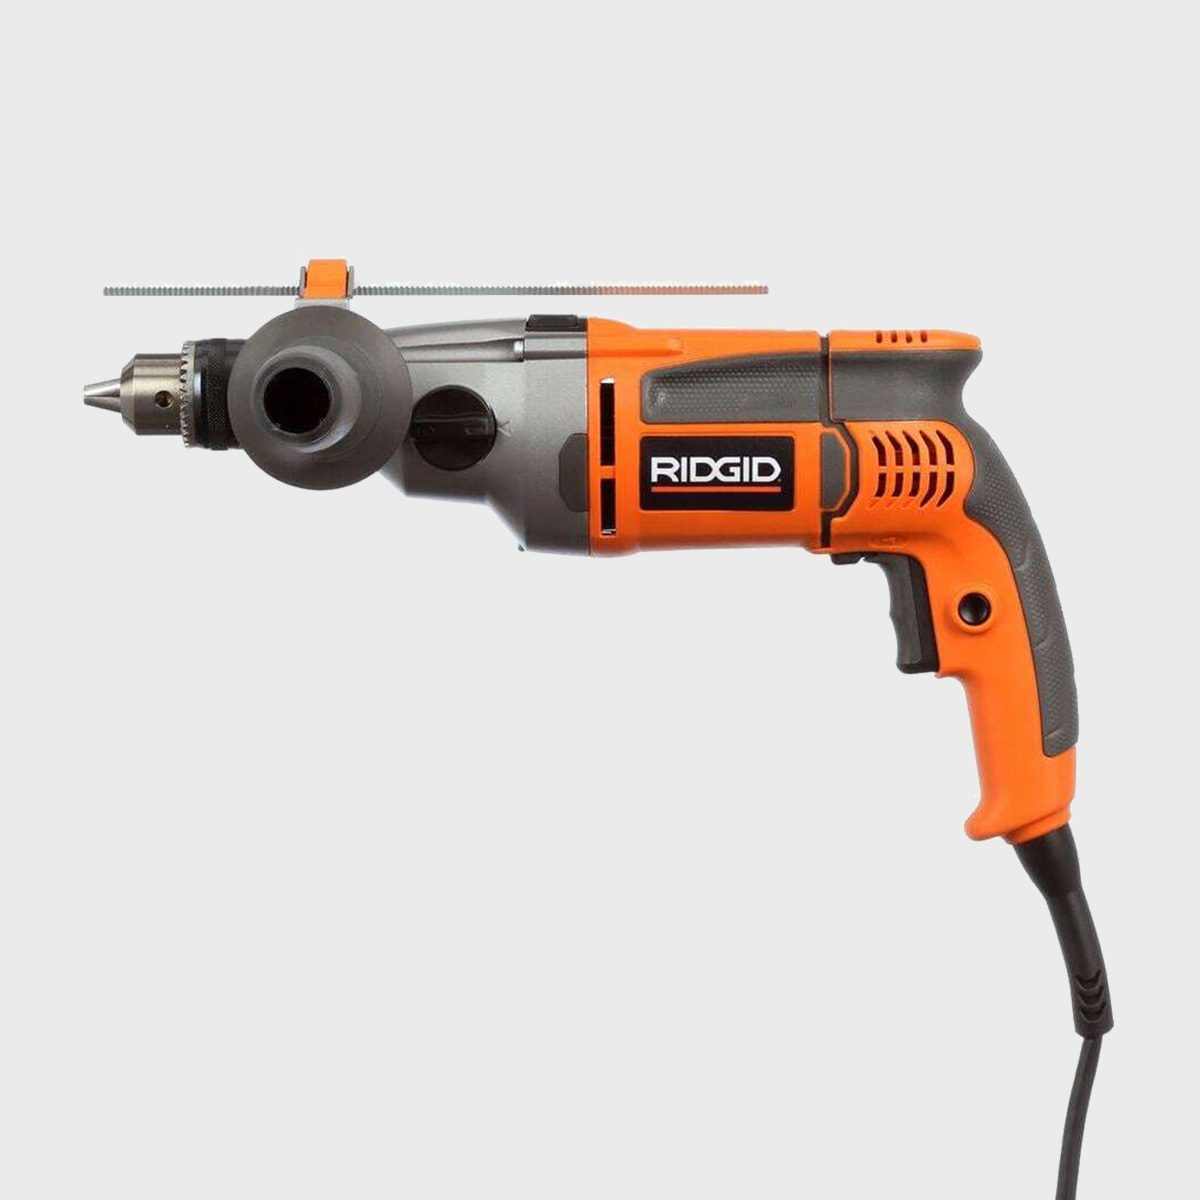 6.3 Amp 1/2 in. Variable Speed Drill